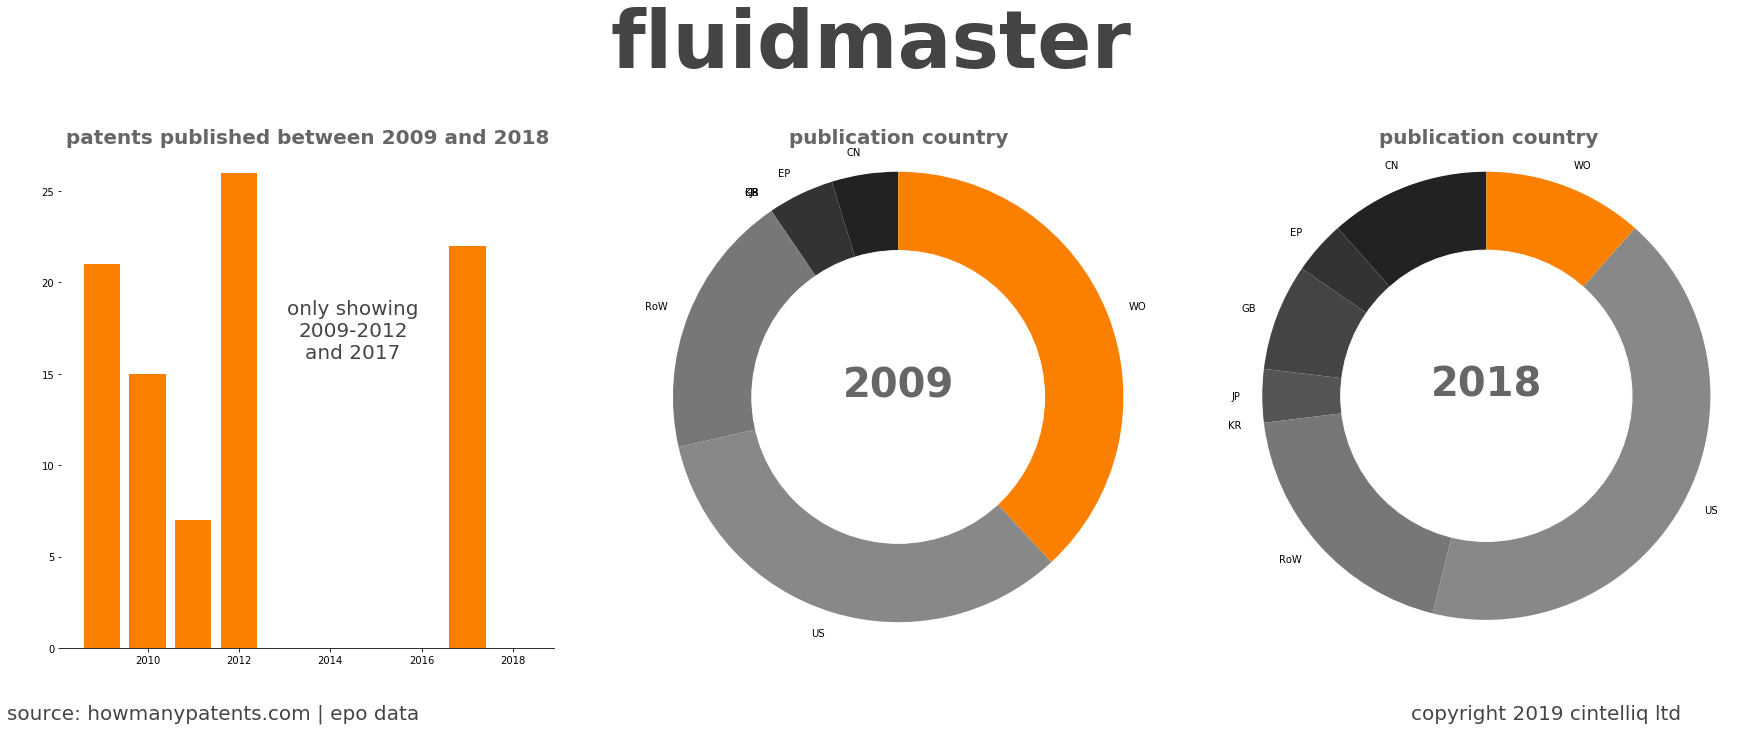 summary of patents for Fluidmaster